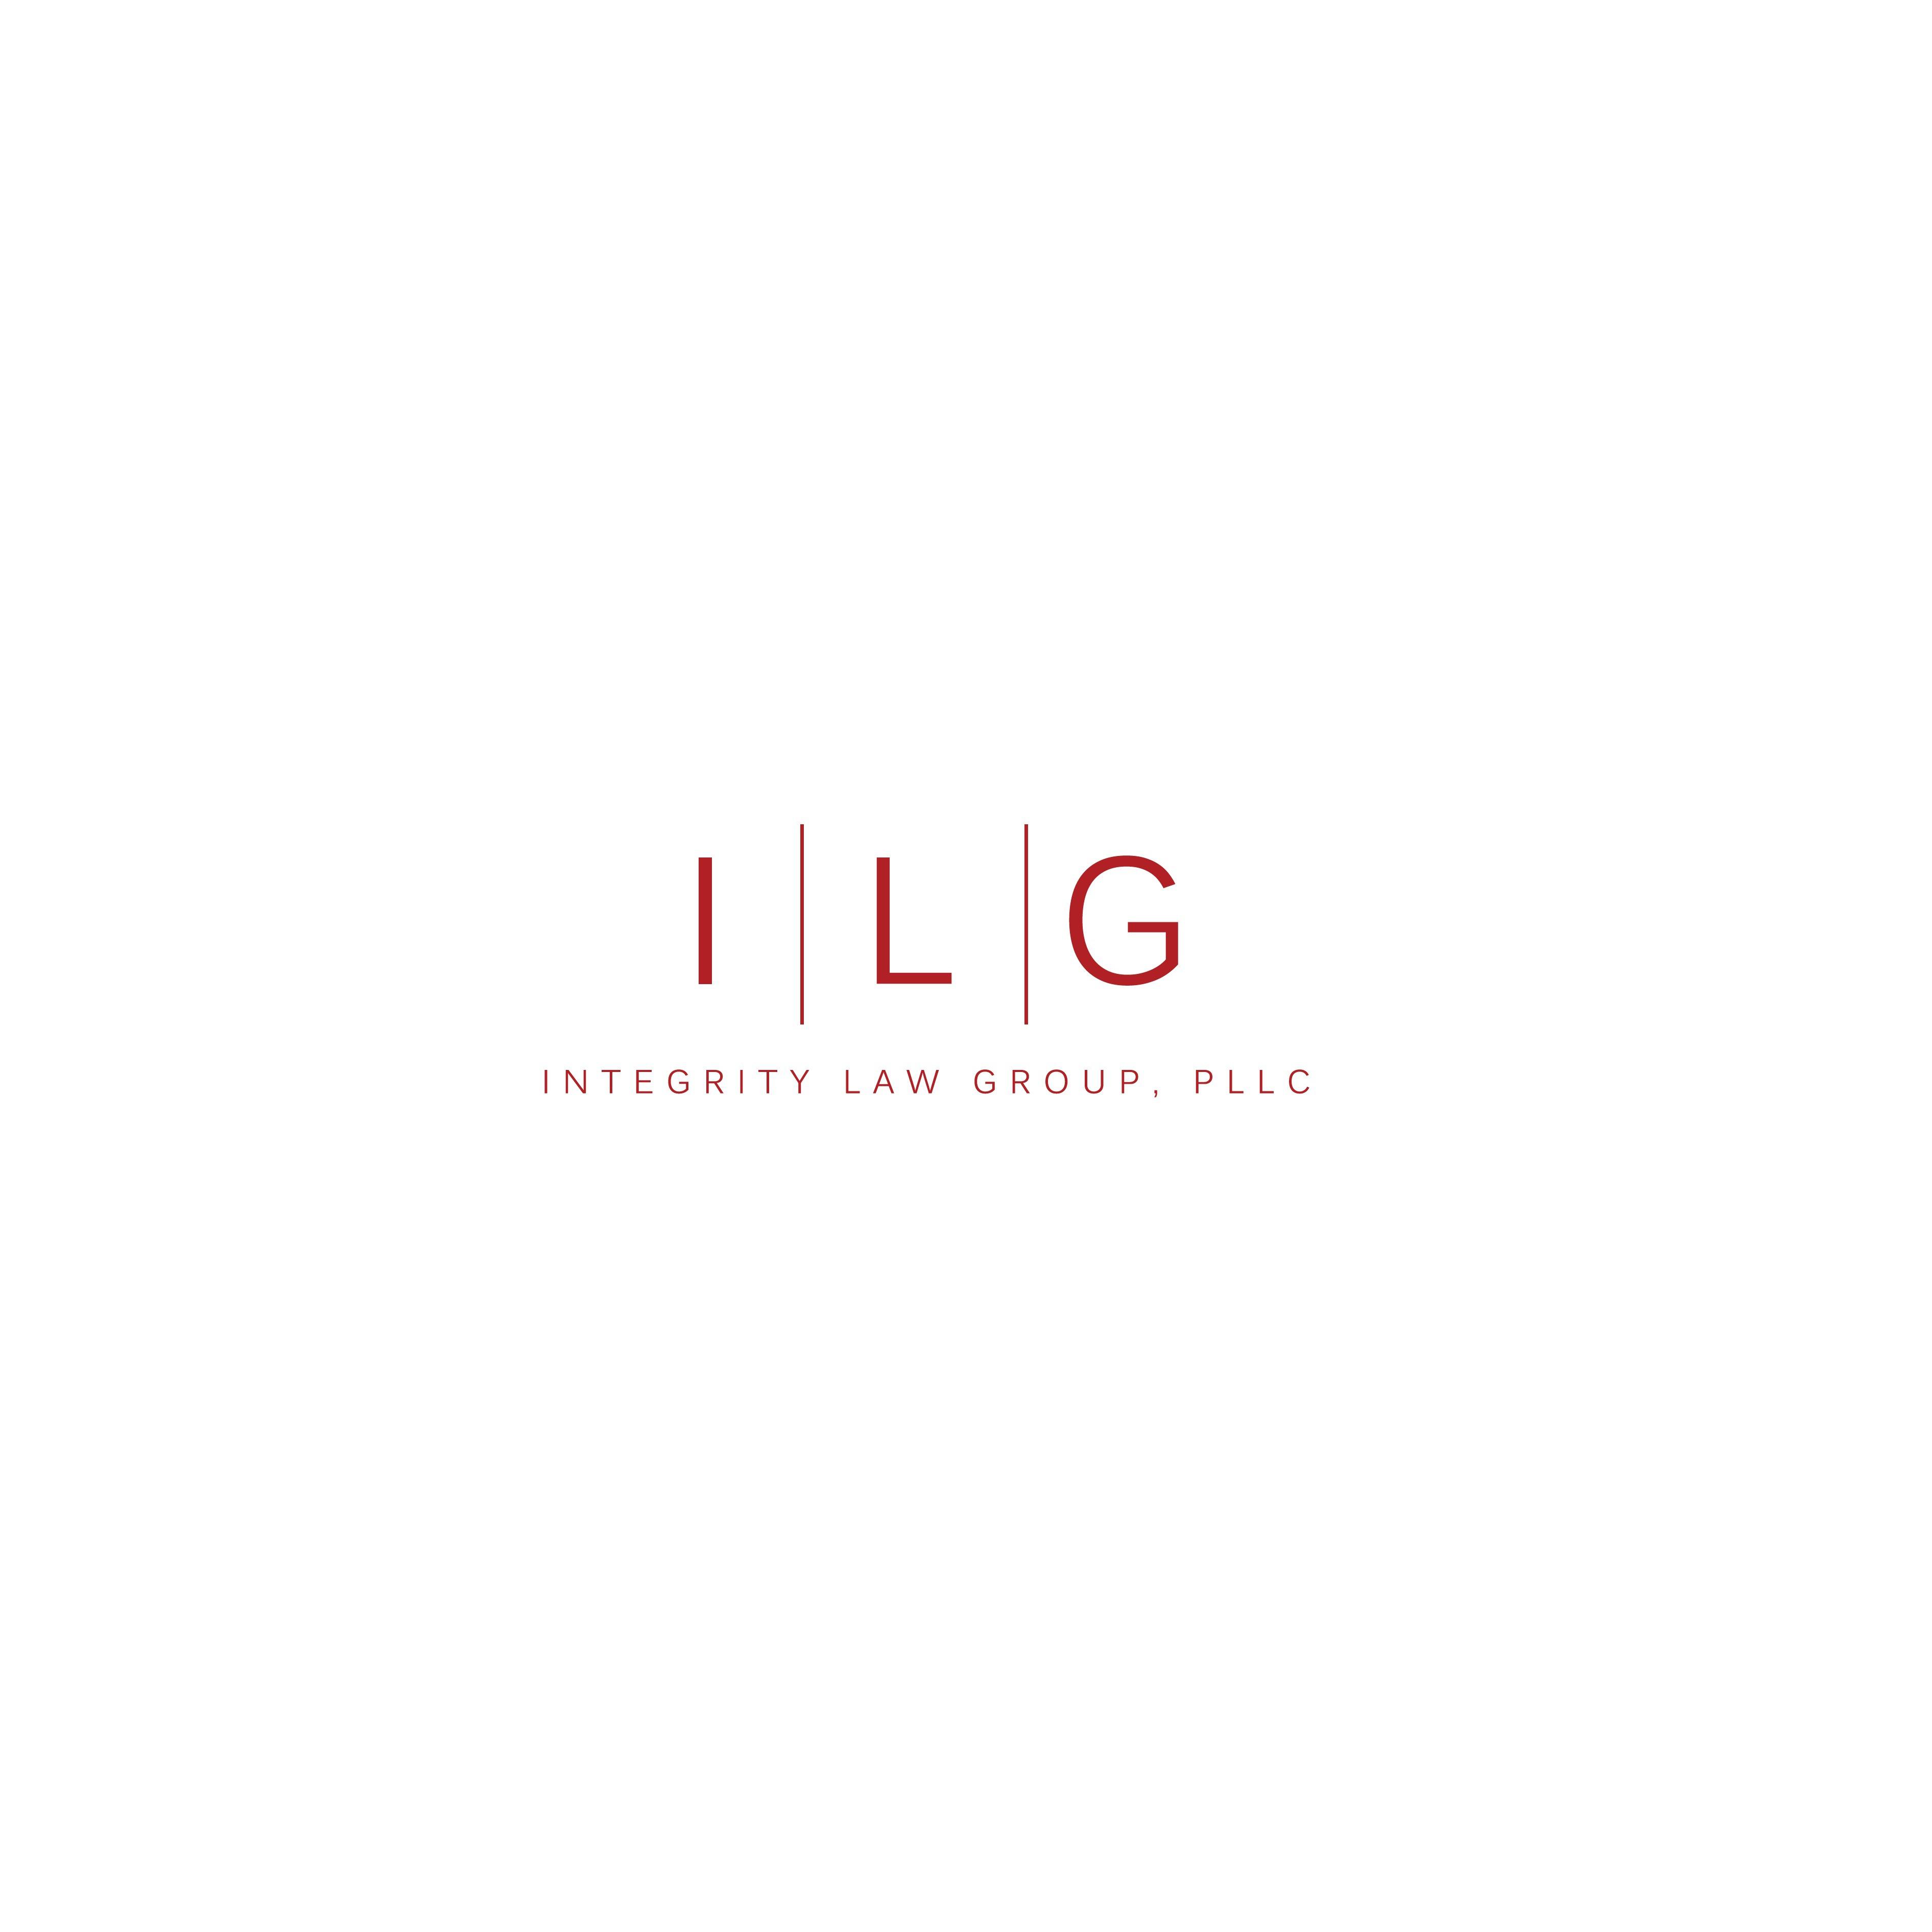 Integrity Law Group PLLC - Seattle, WA 98121 - (206)838-8118 | ShowMeLocal.com